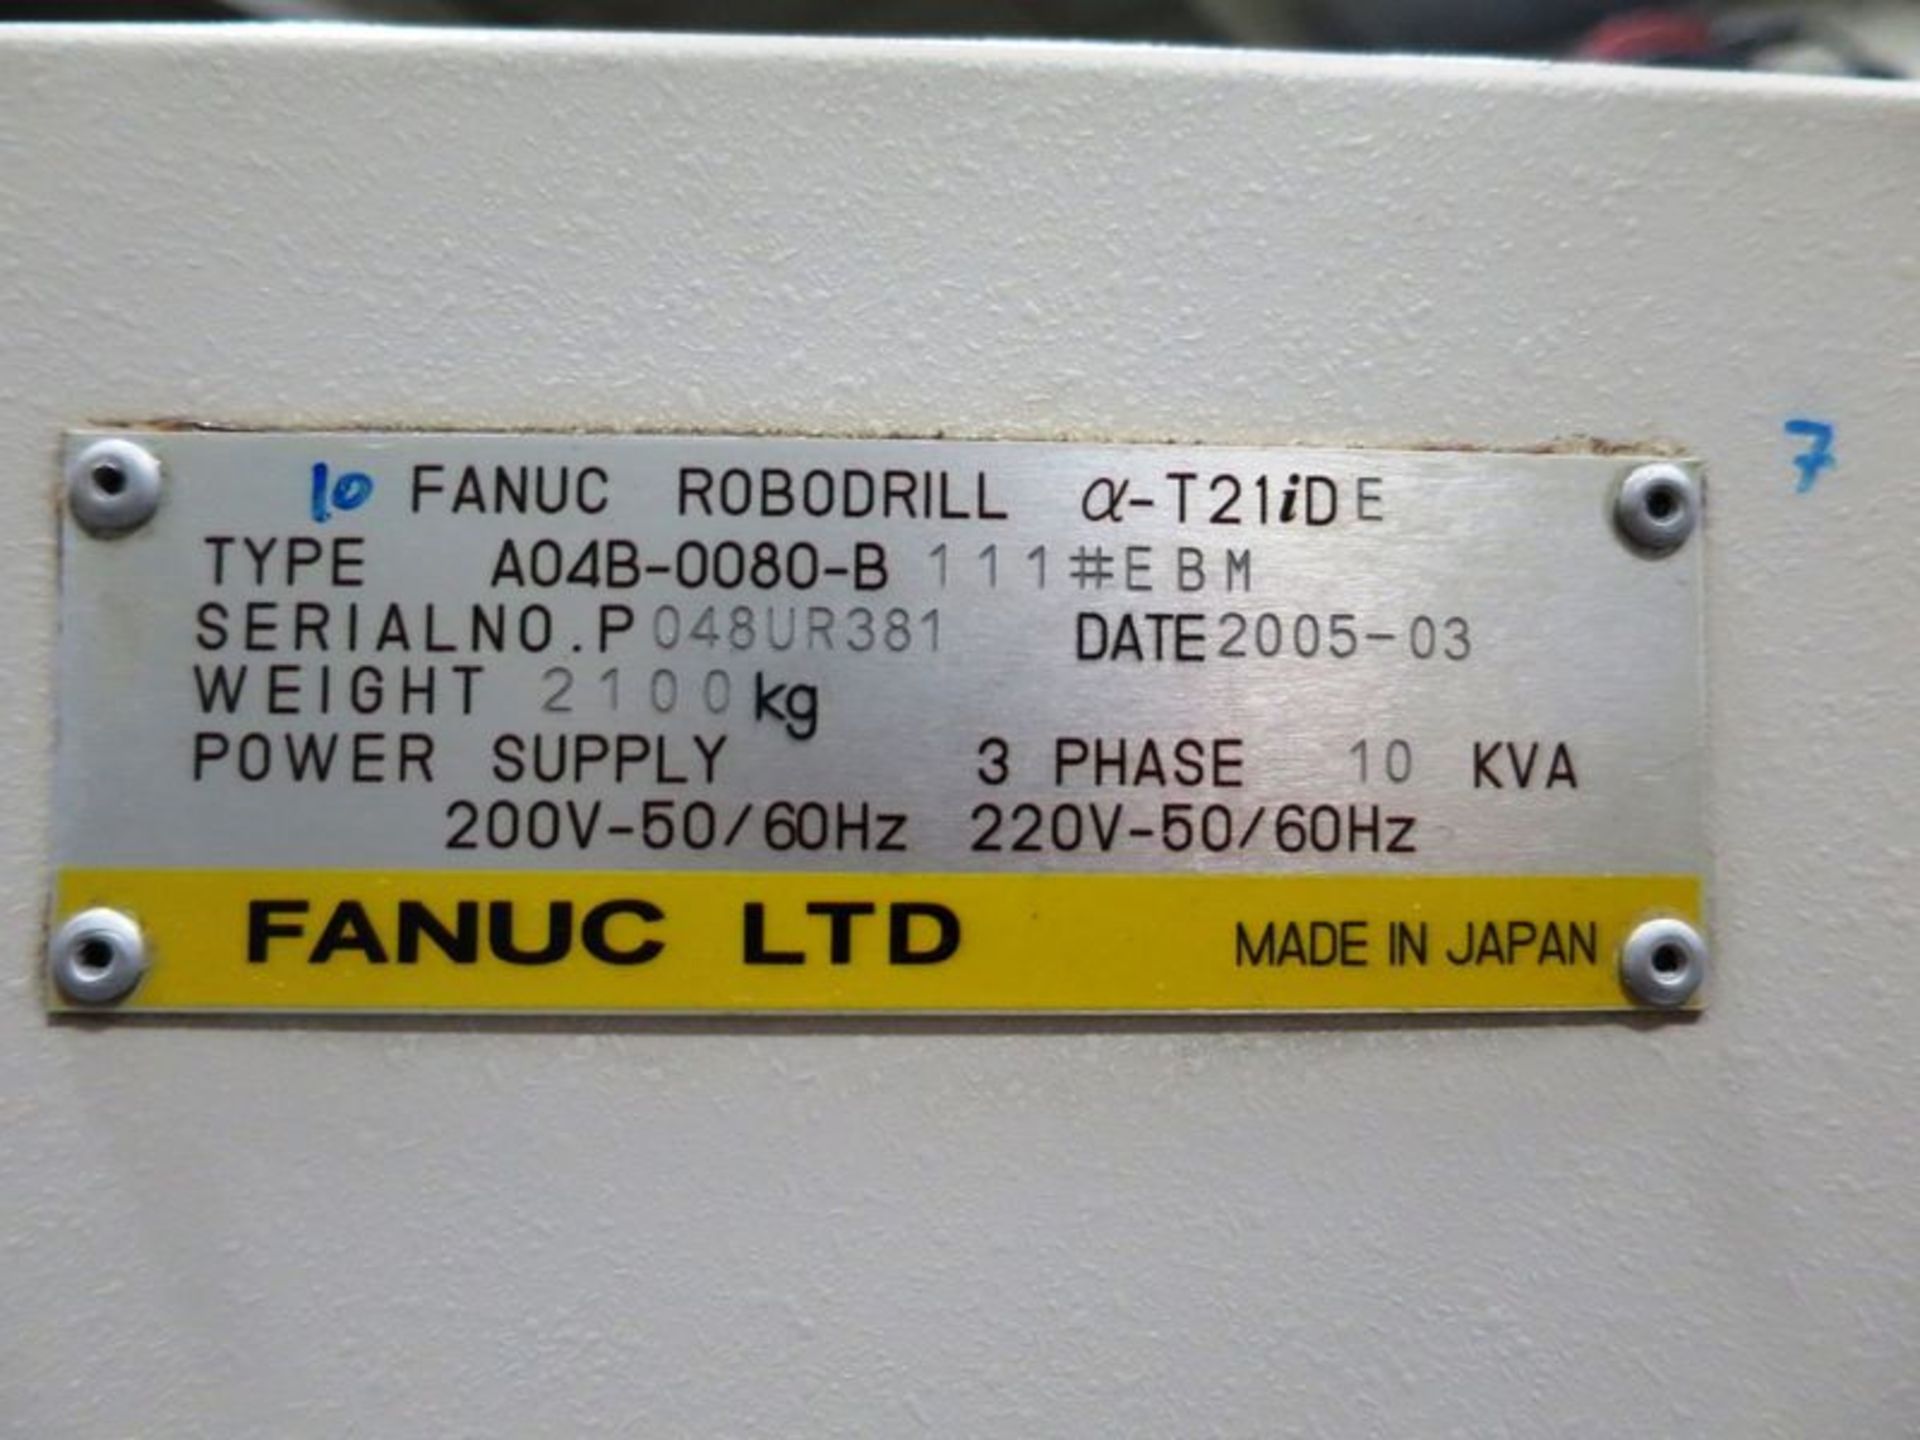 Fanuc Robodrill Alpha T21iDE 3-Axis Vertical High Speed Drill Tap Machining Center, S/N PO8UR381 - Image 10 of 12